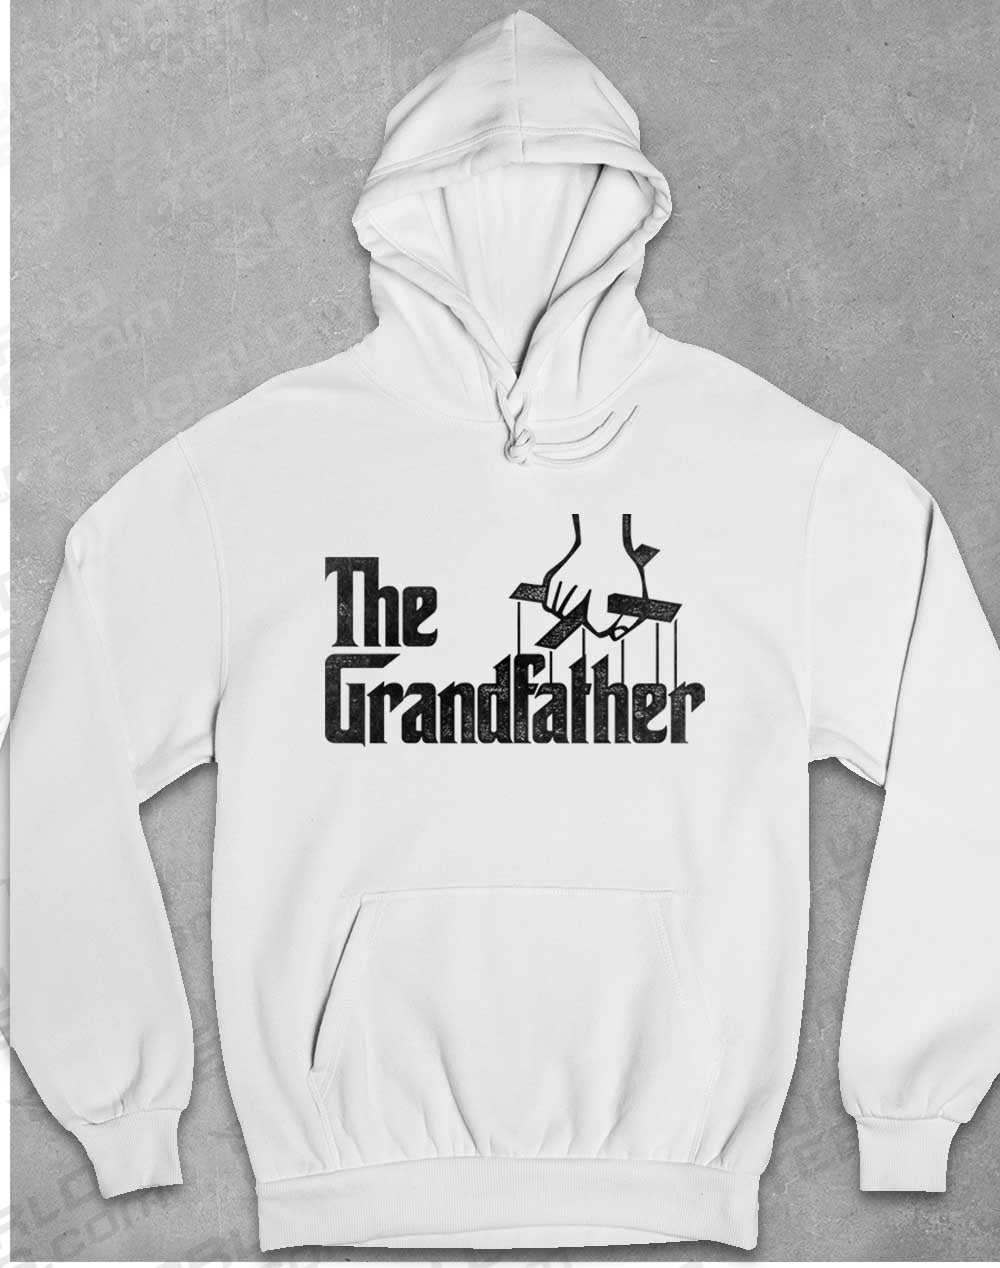 Arctic White - The Grandfather Hoodie